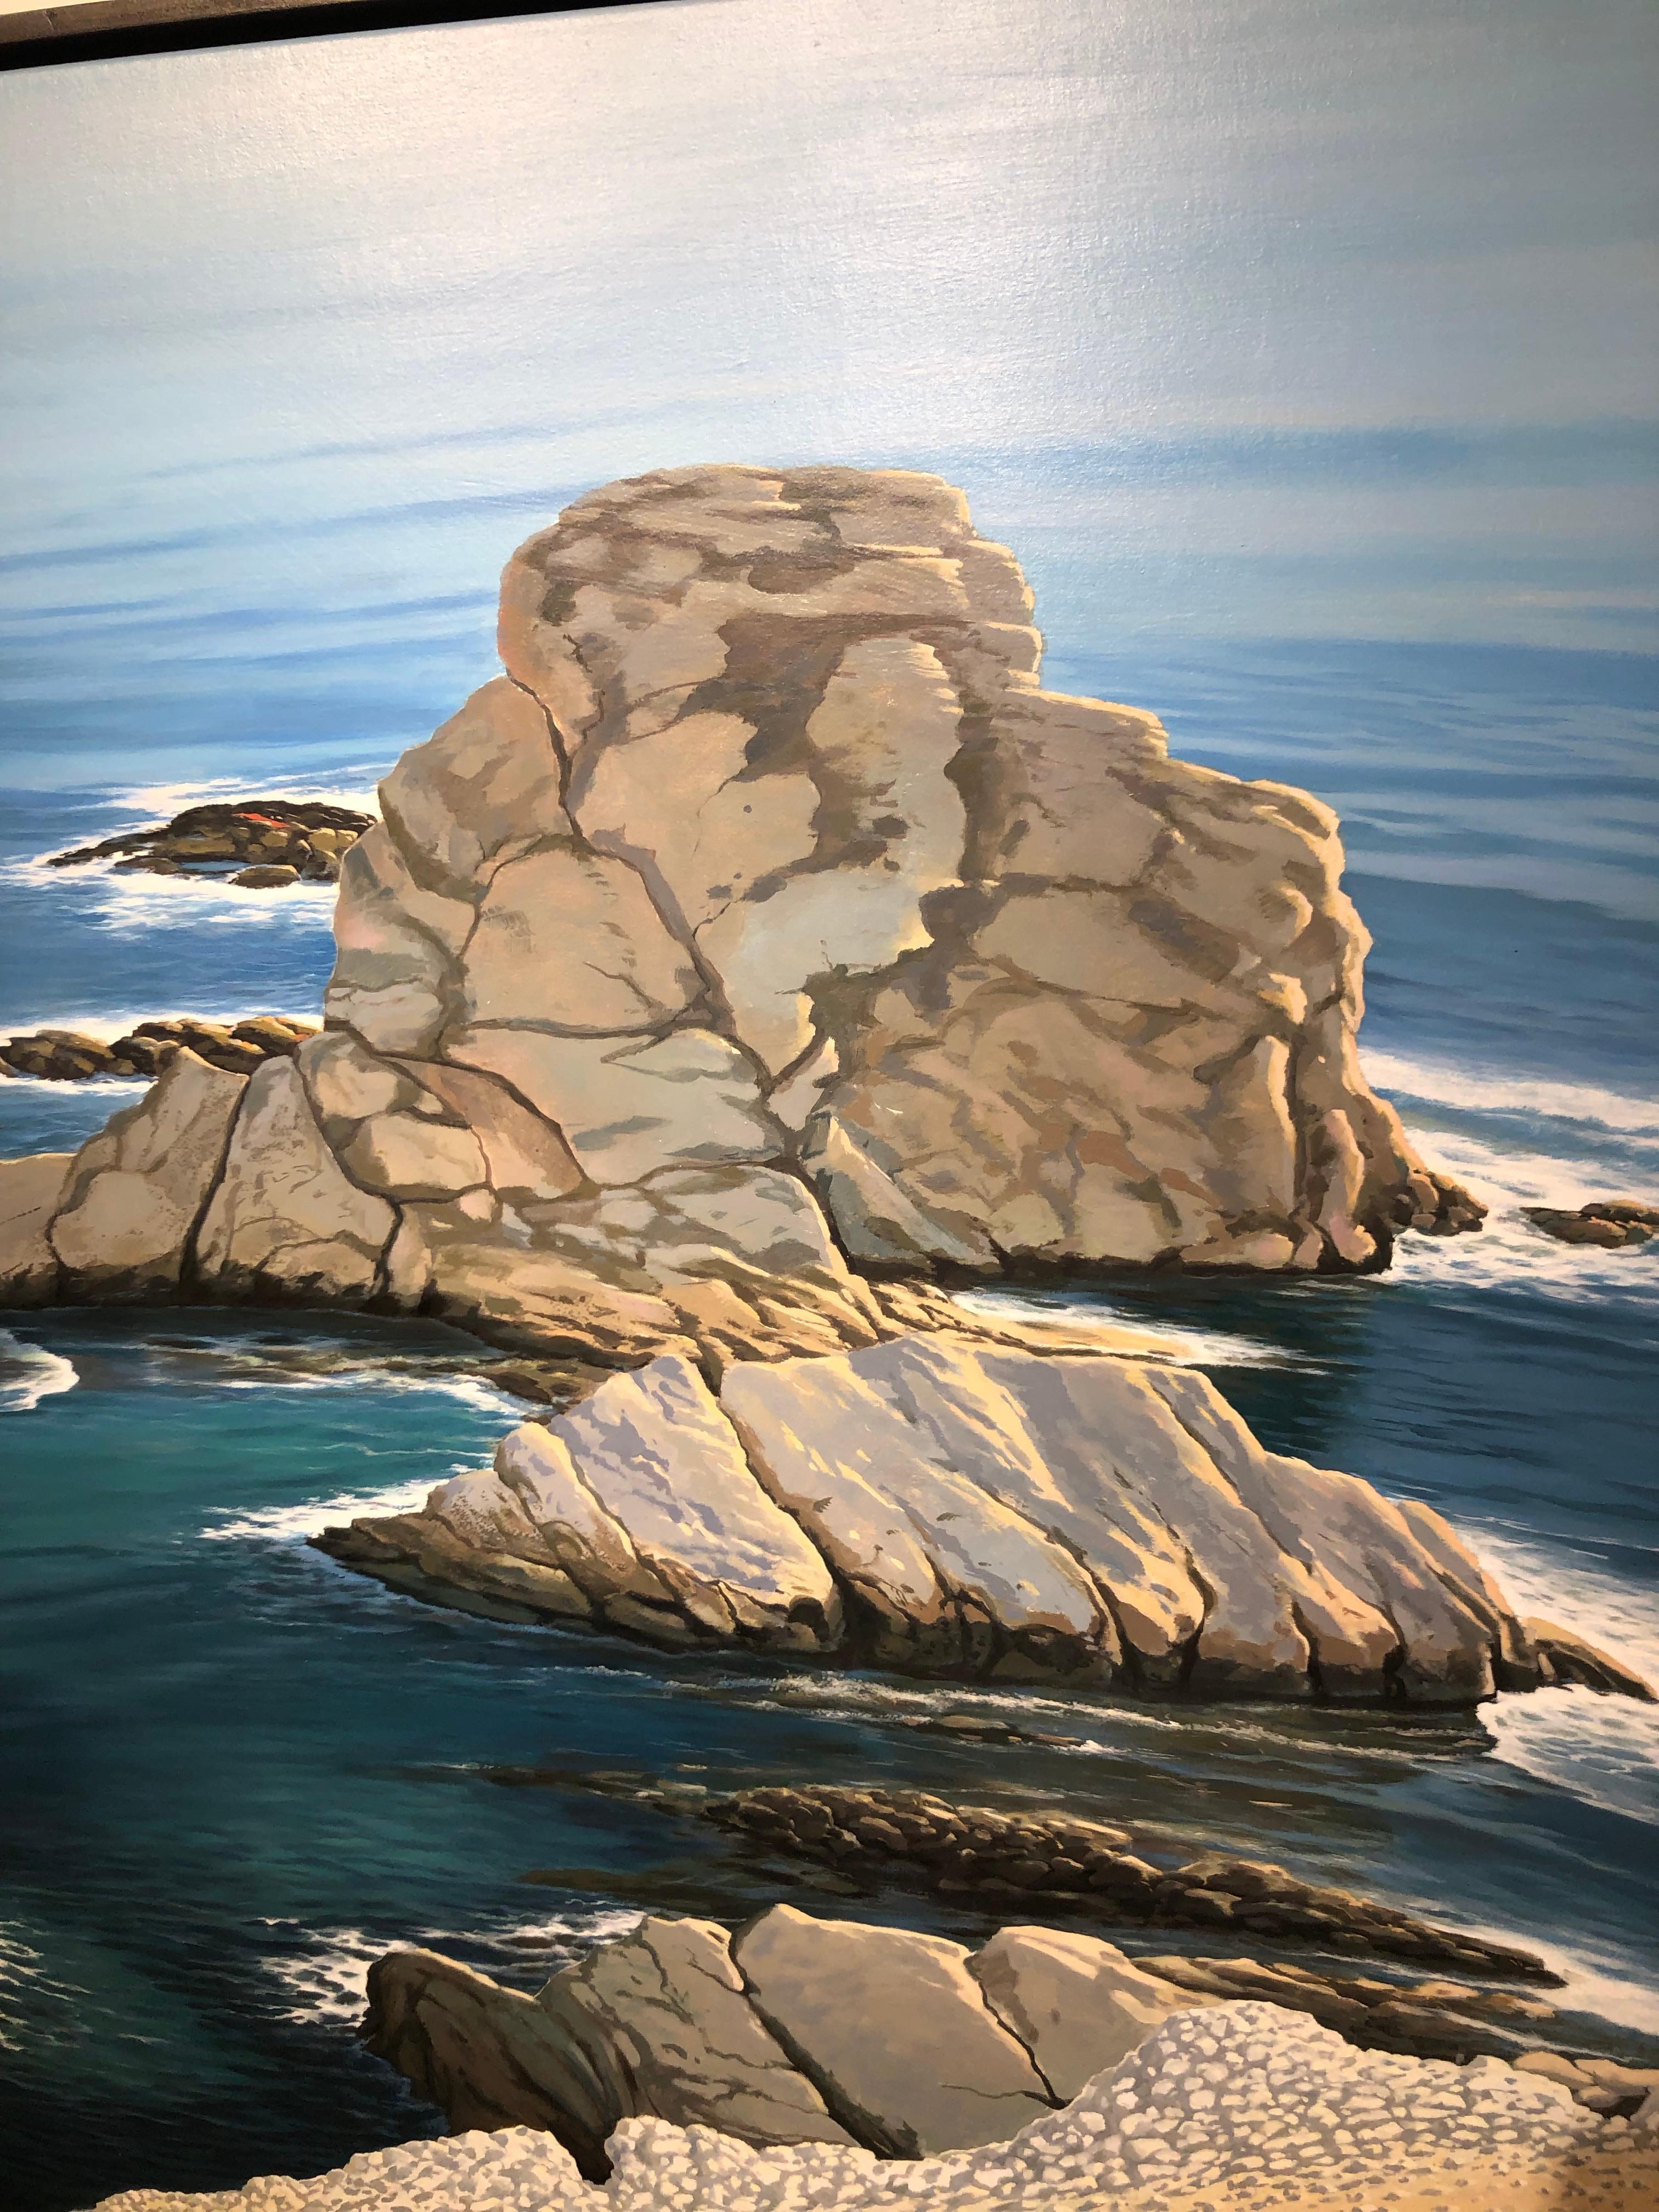 Evocation - Ocean Cliffside Scene Bathed in Warm Light and Blue Turquoise Water 2